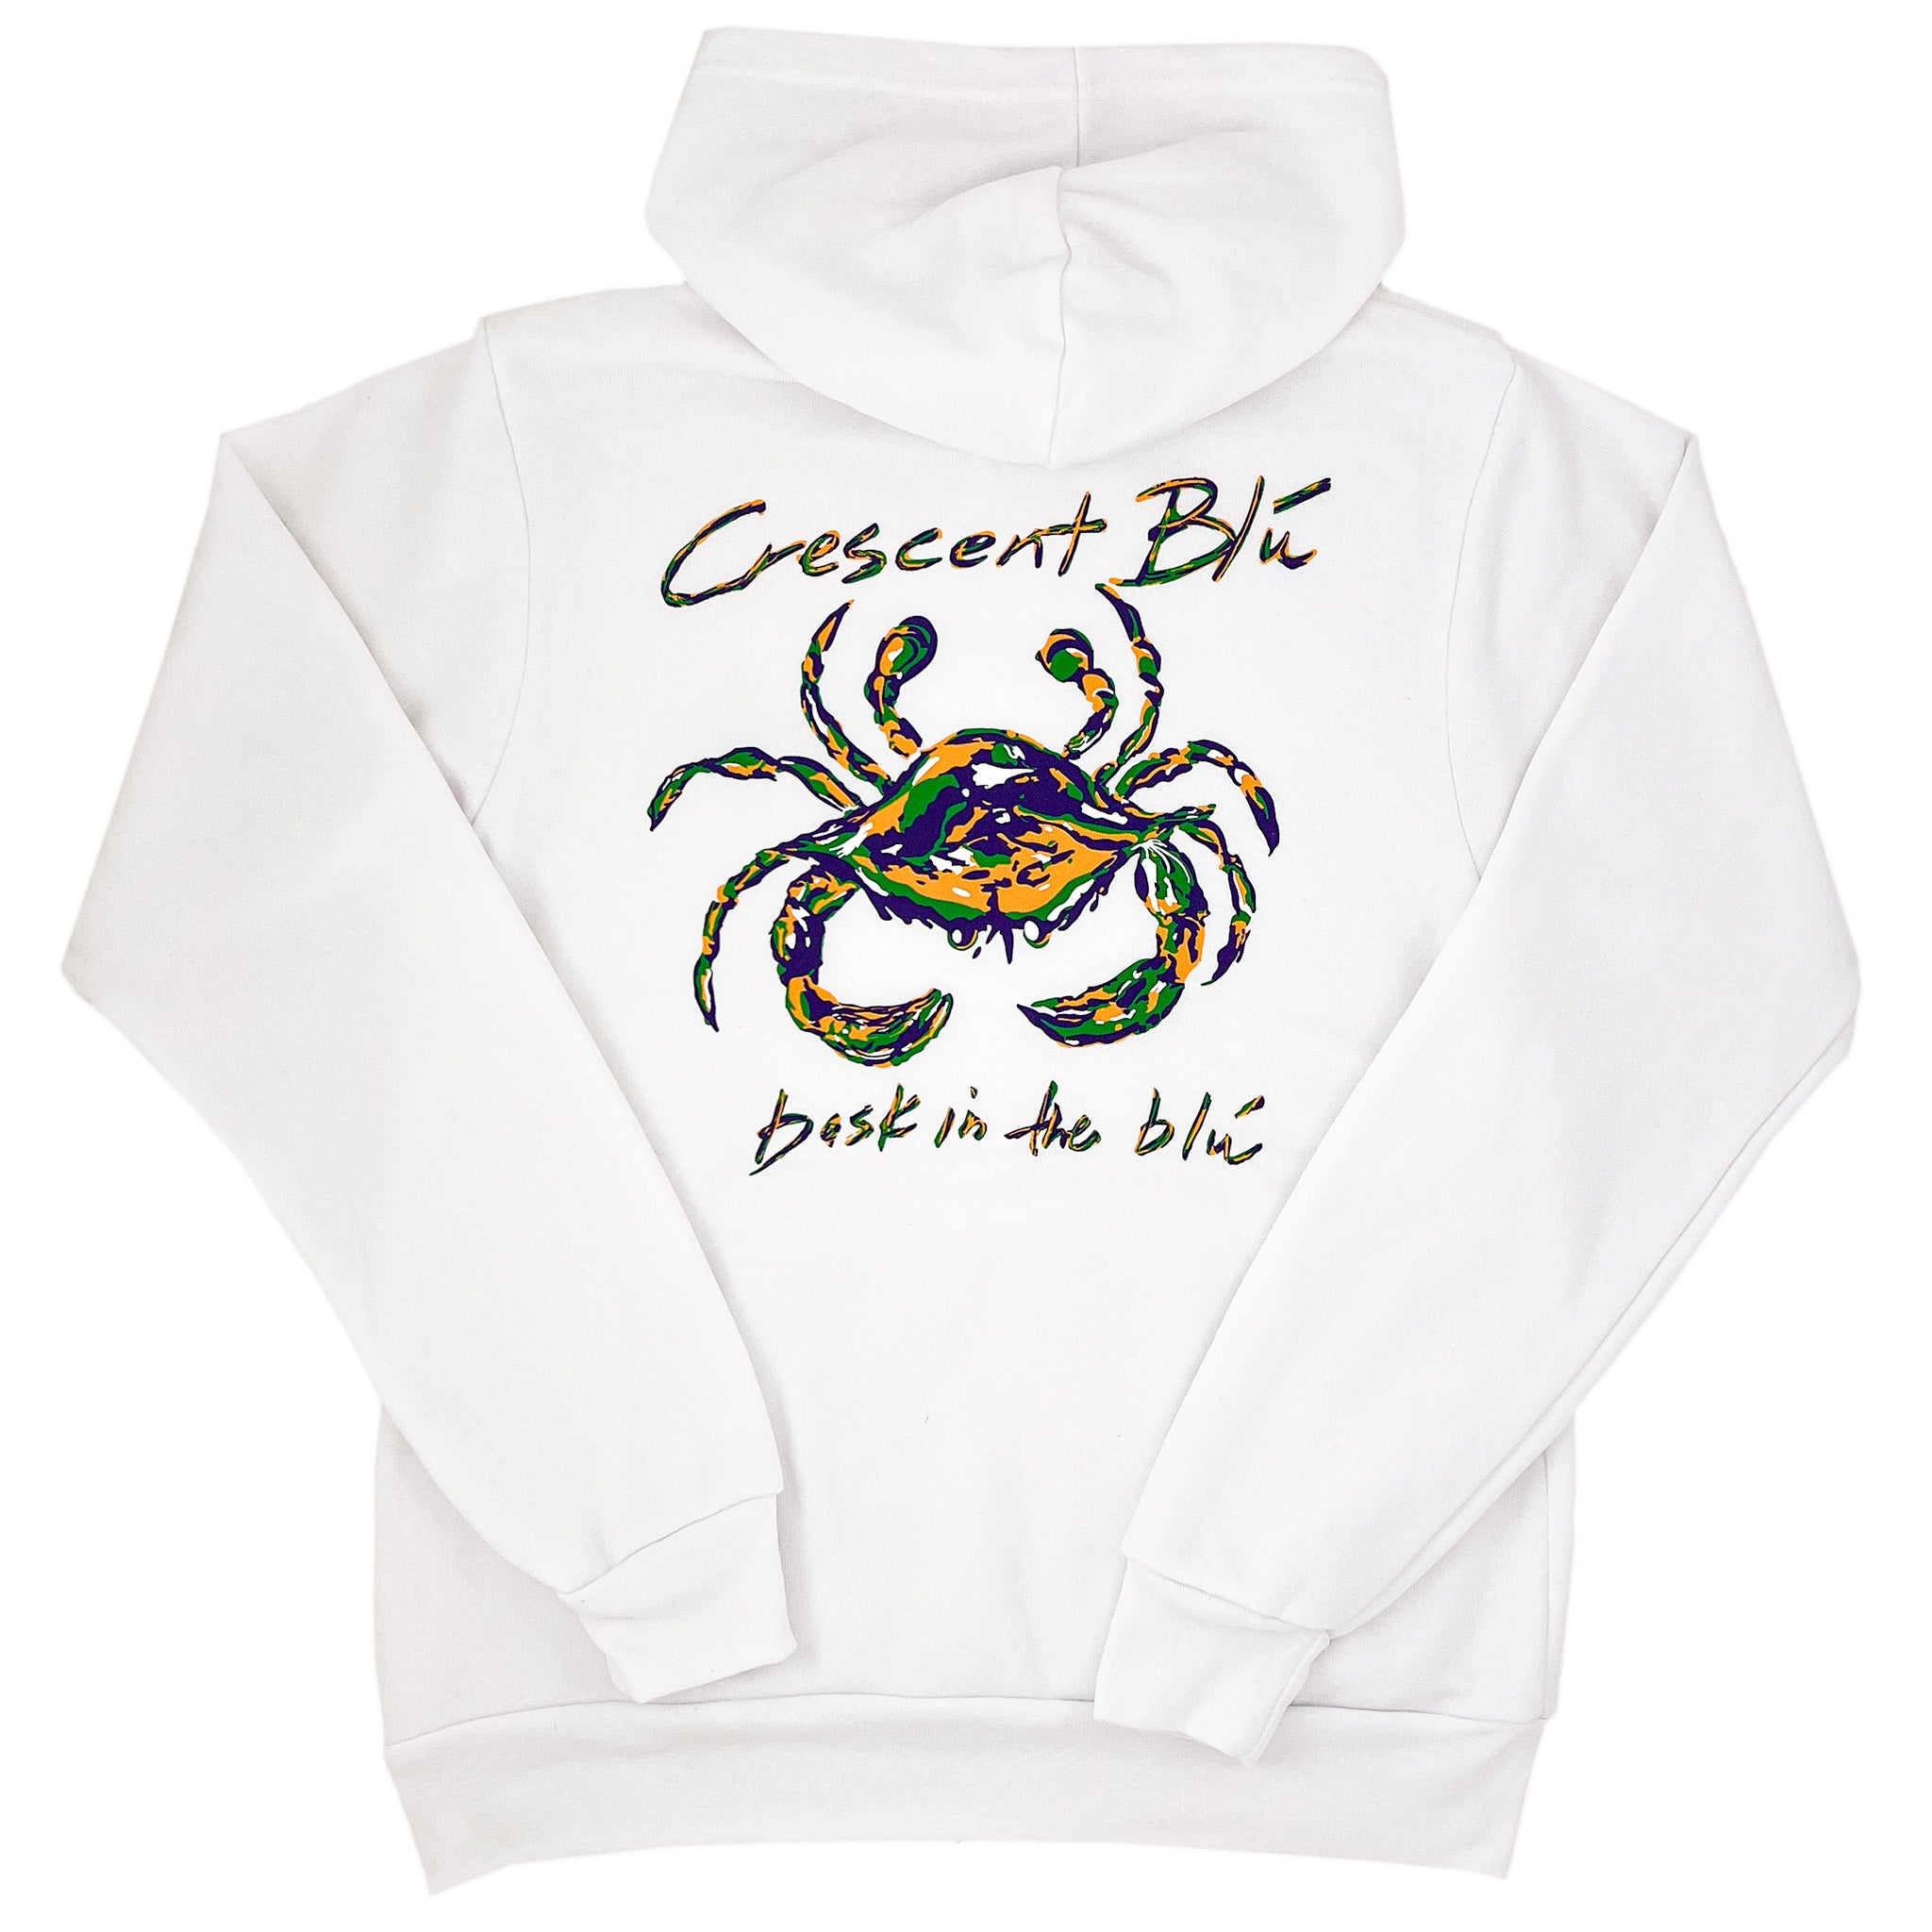 The back of a white hooded sweatshirt with a Mardi Gras colored crab and the words Crescent Blu above and bask in the blu below. 